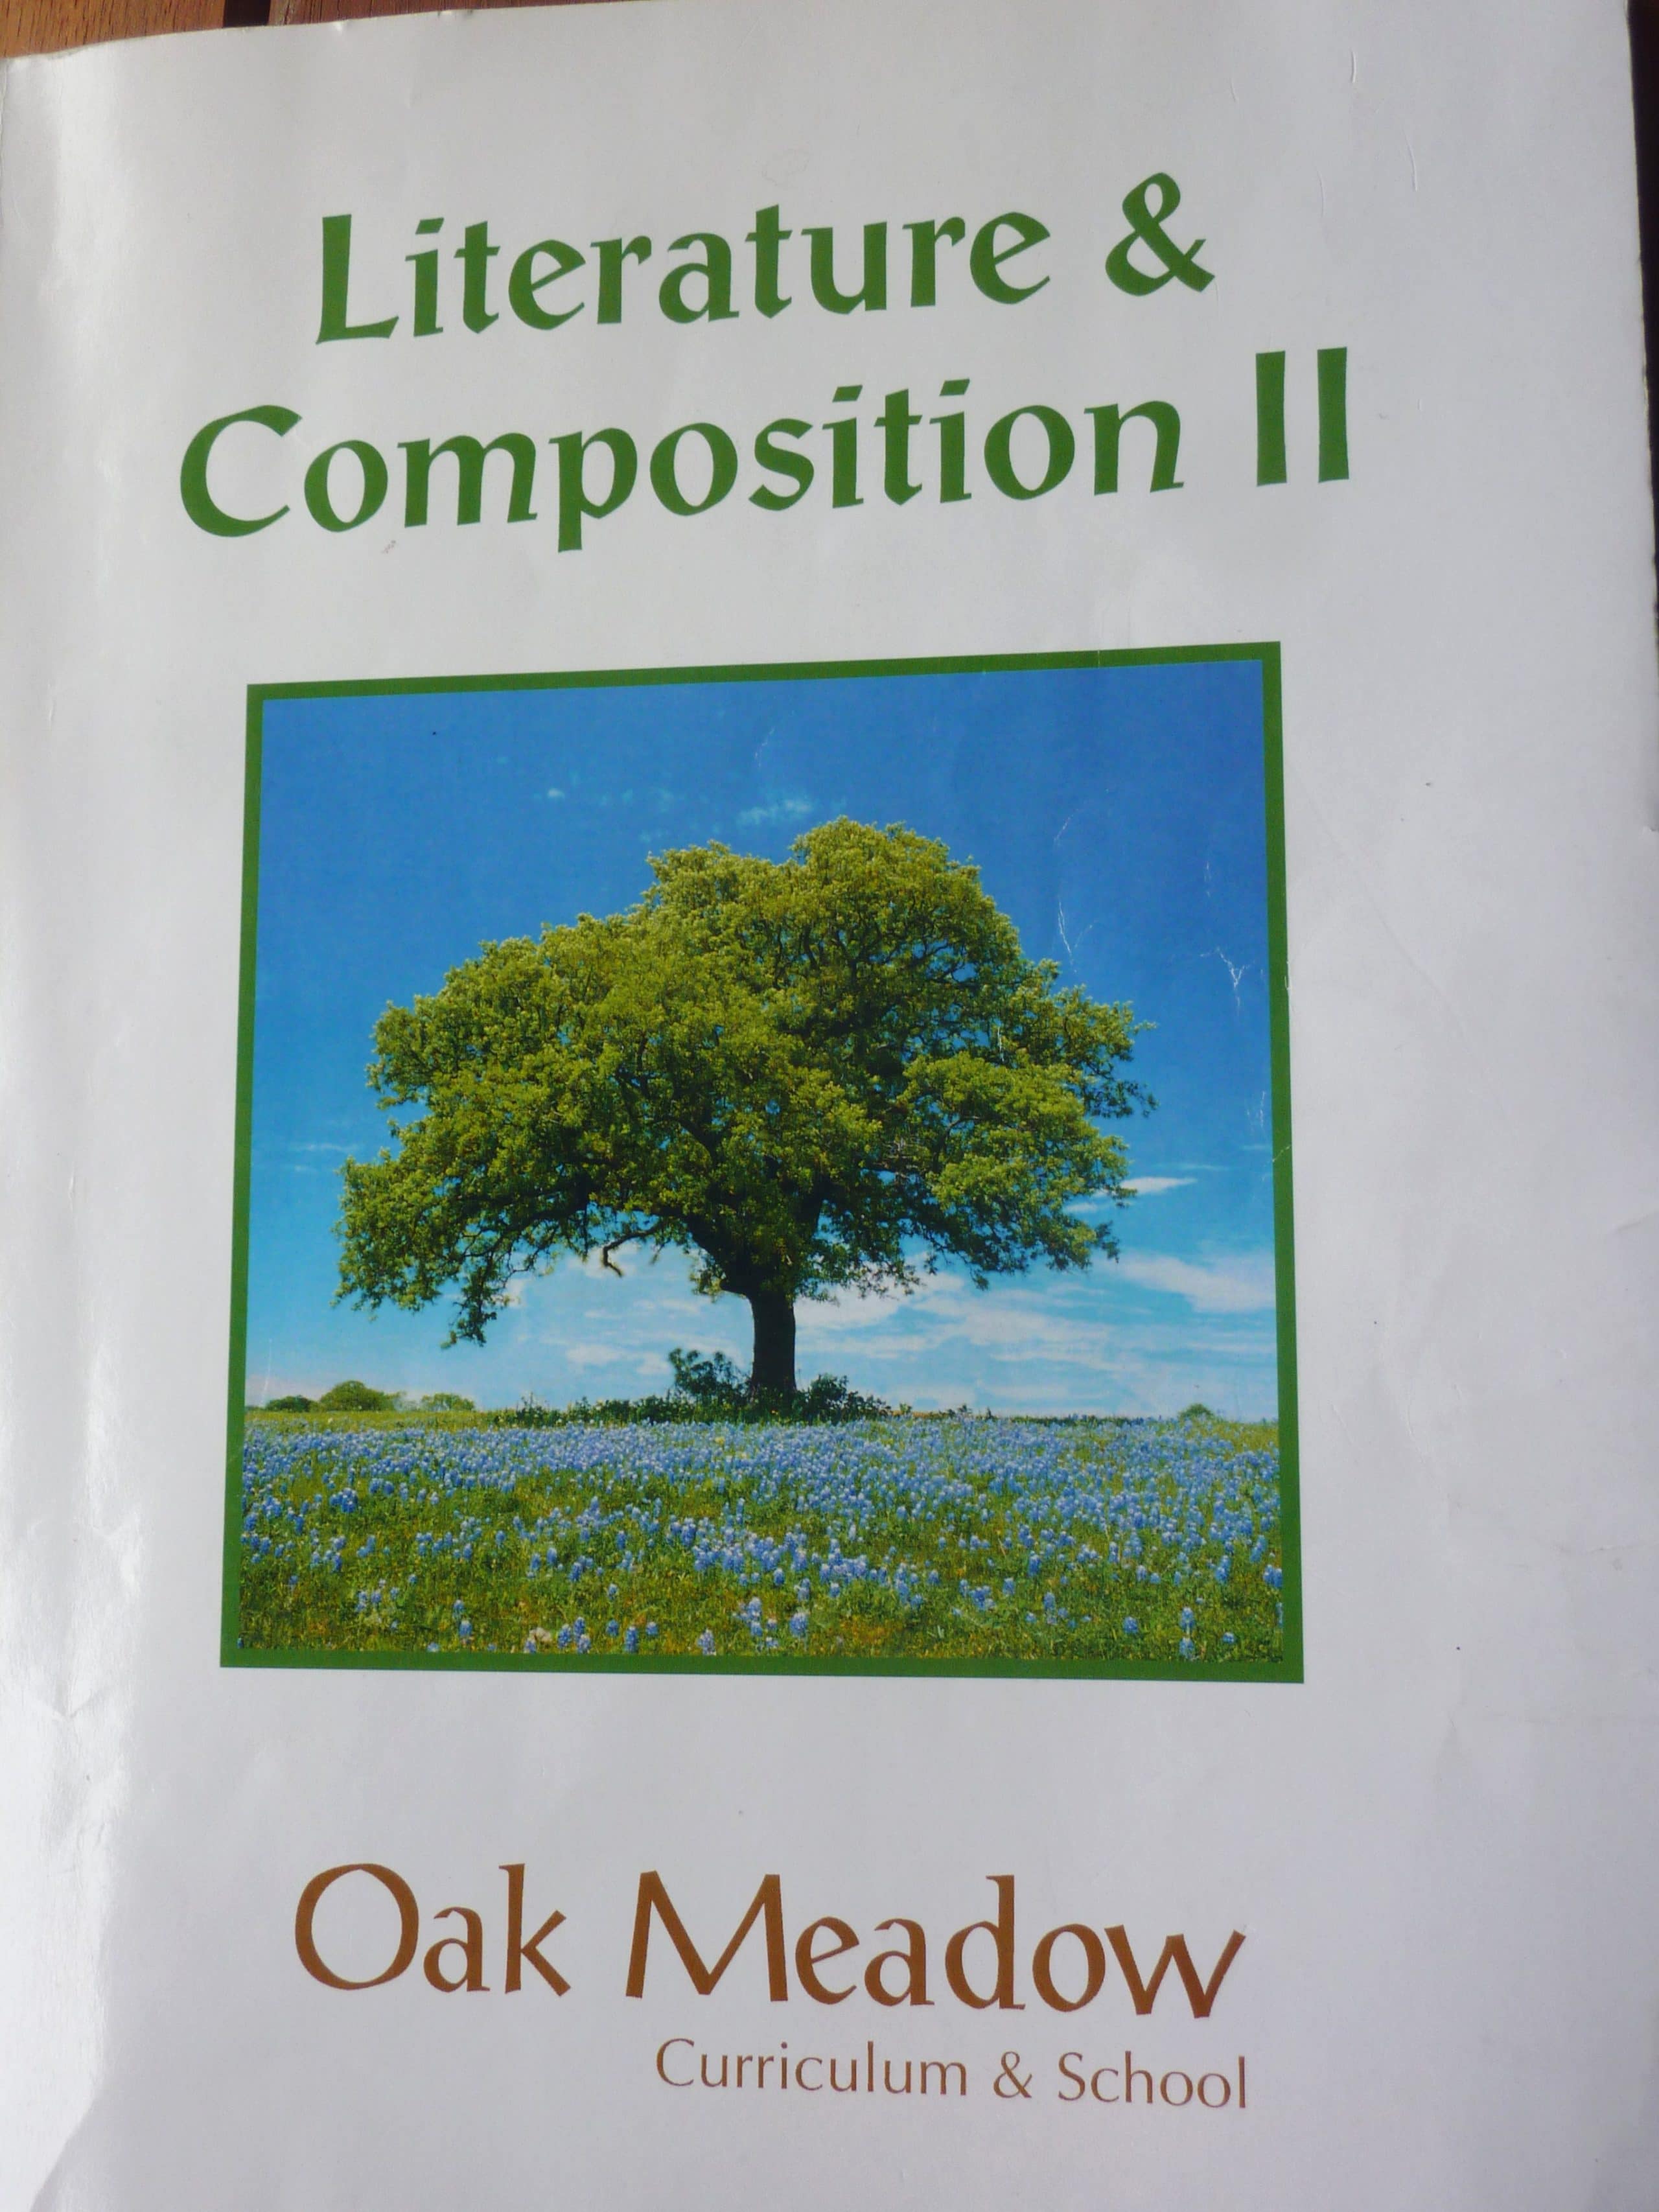 Oak Meadow – Literature and Composition II